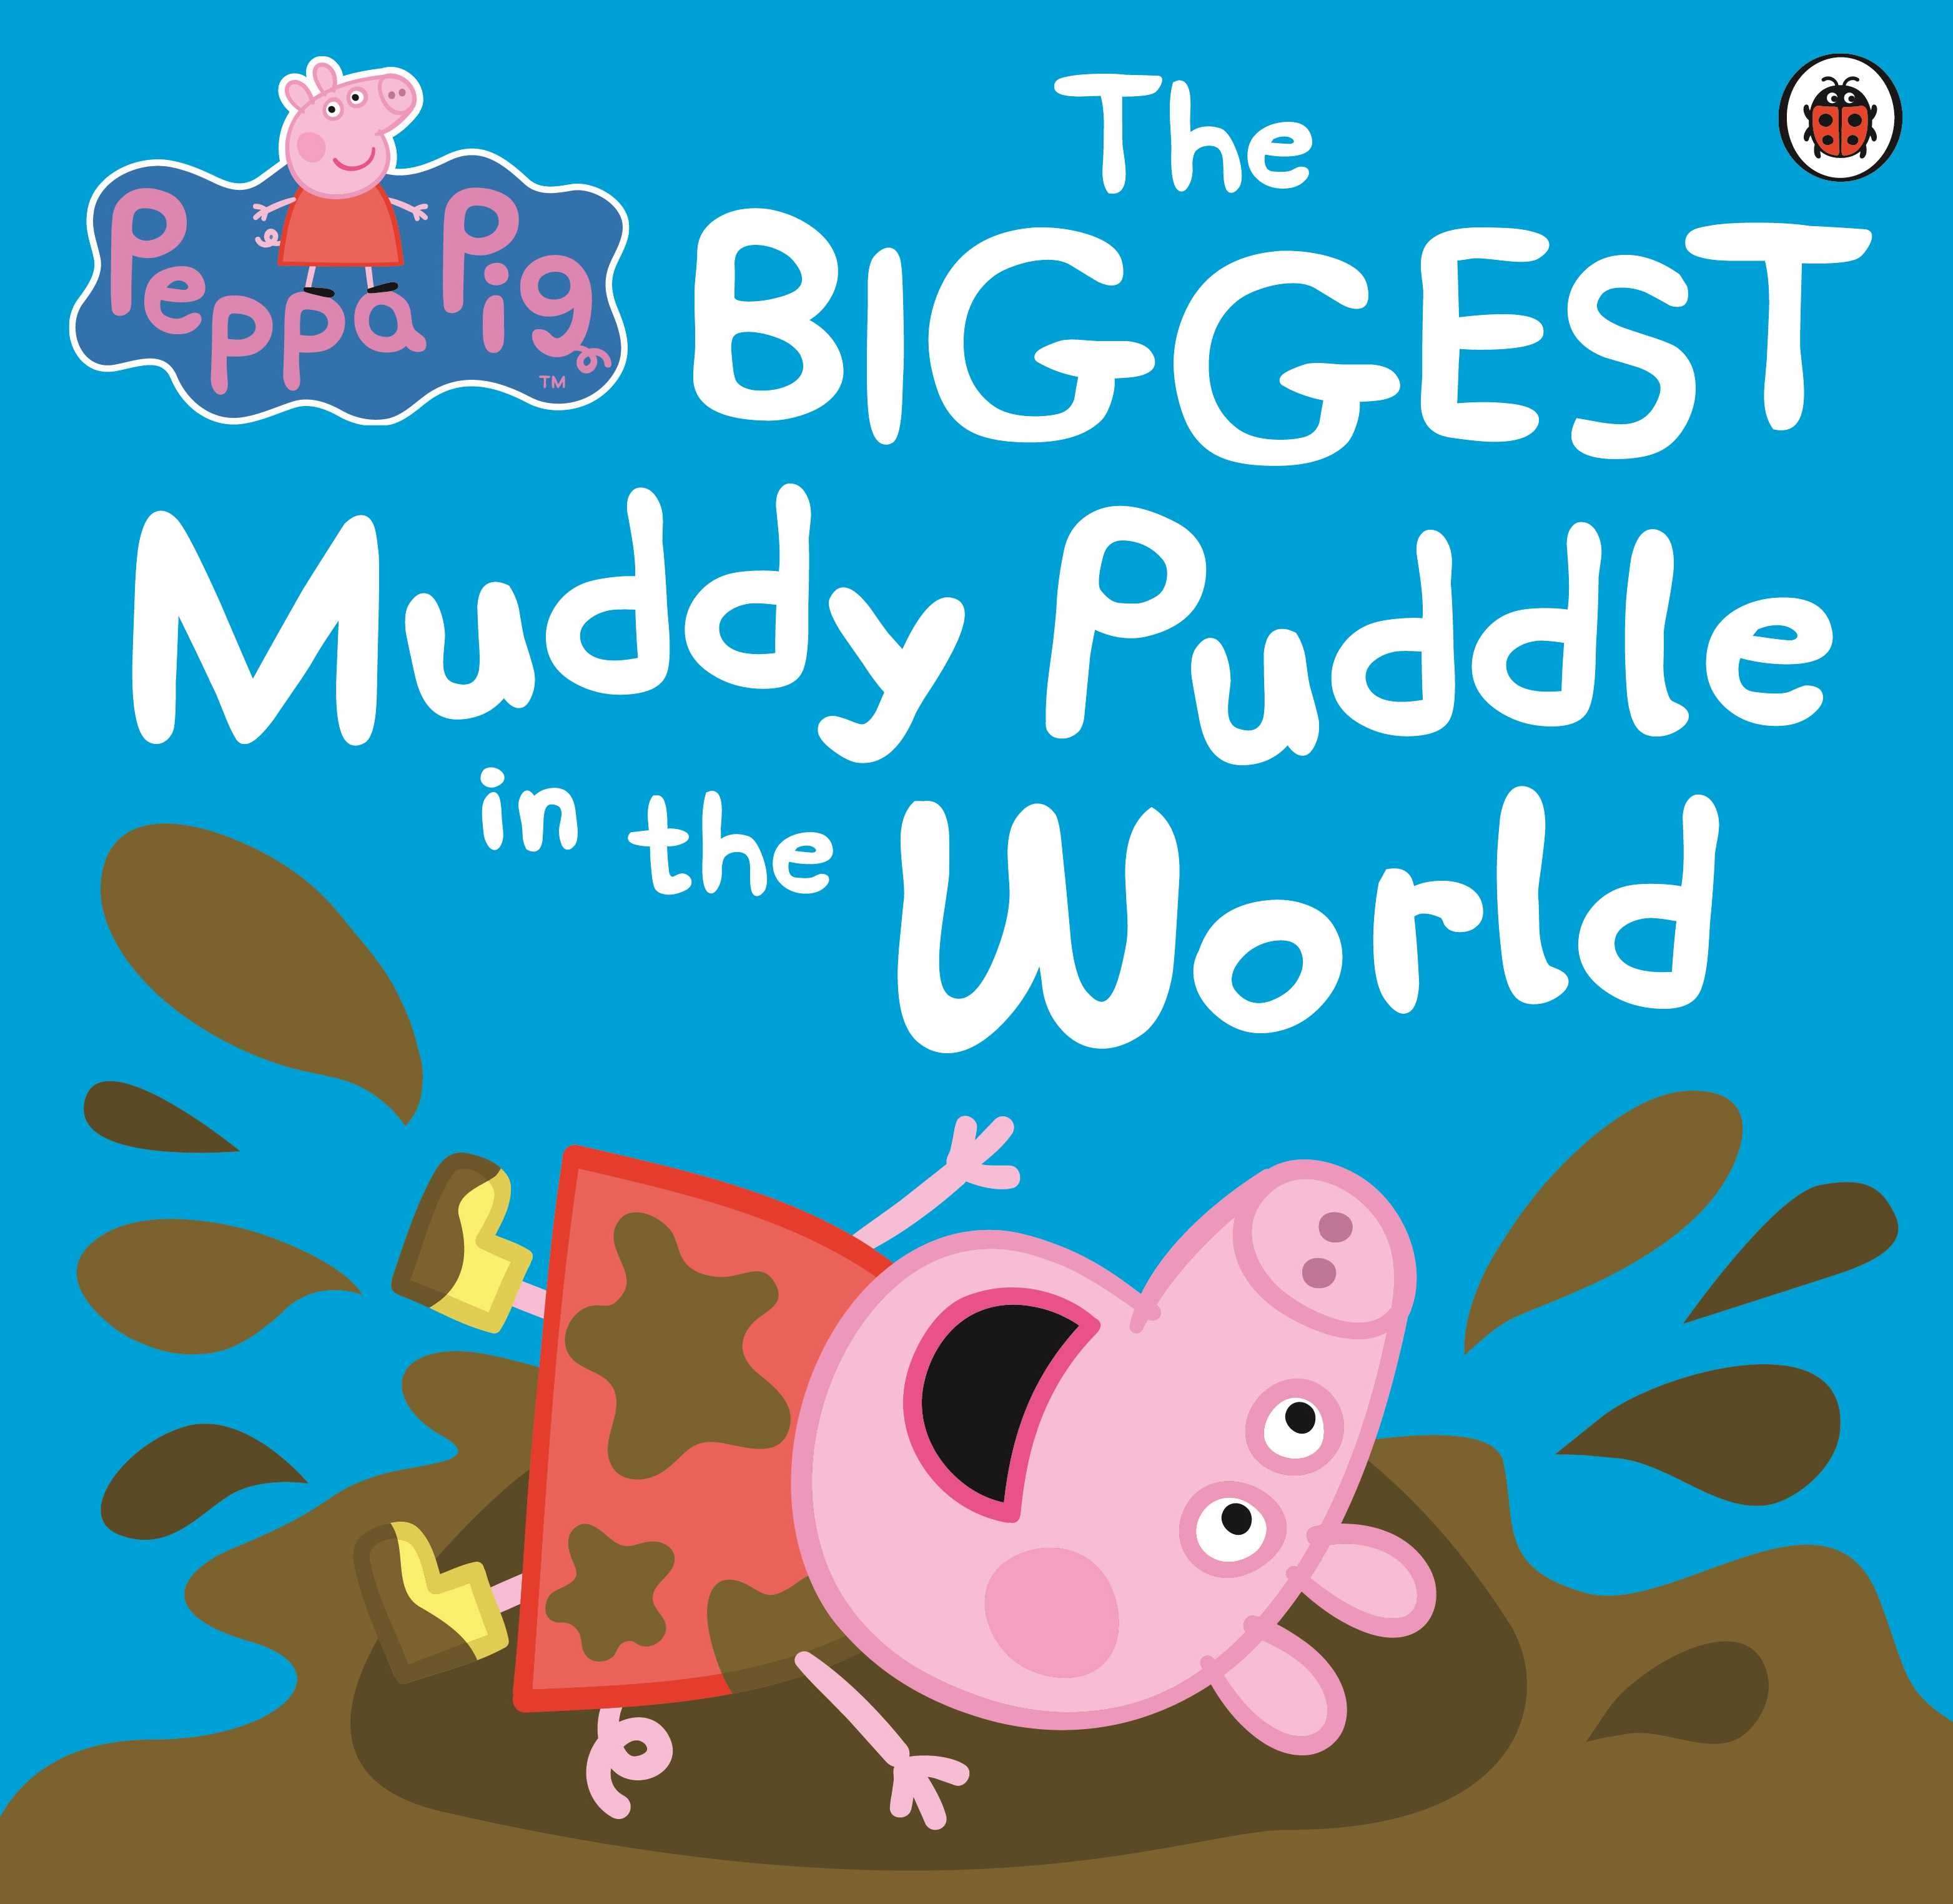 Peppa Pig : The Biggest Muddy Puddle in The World